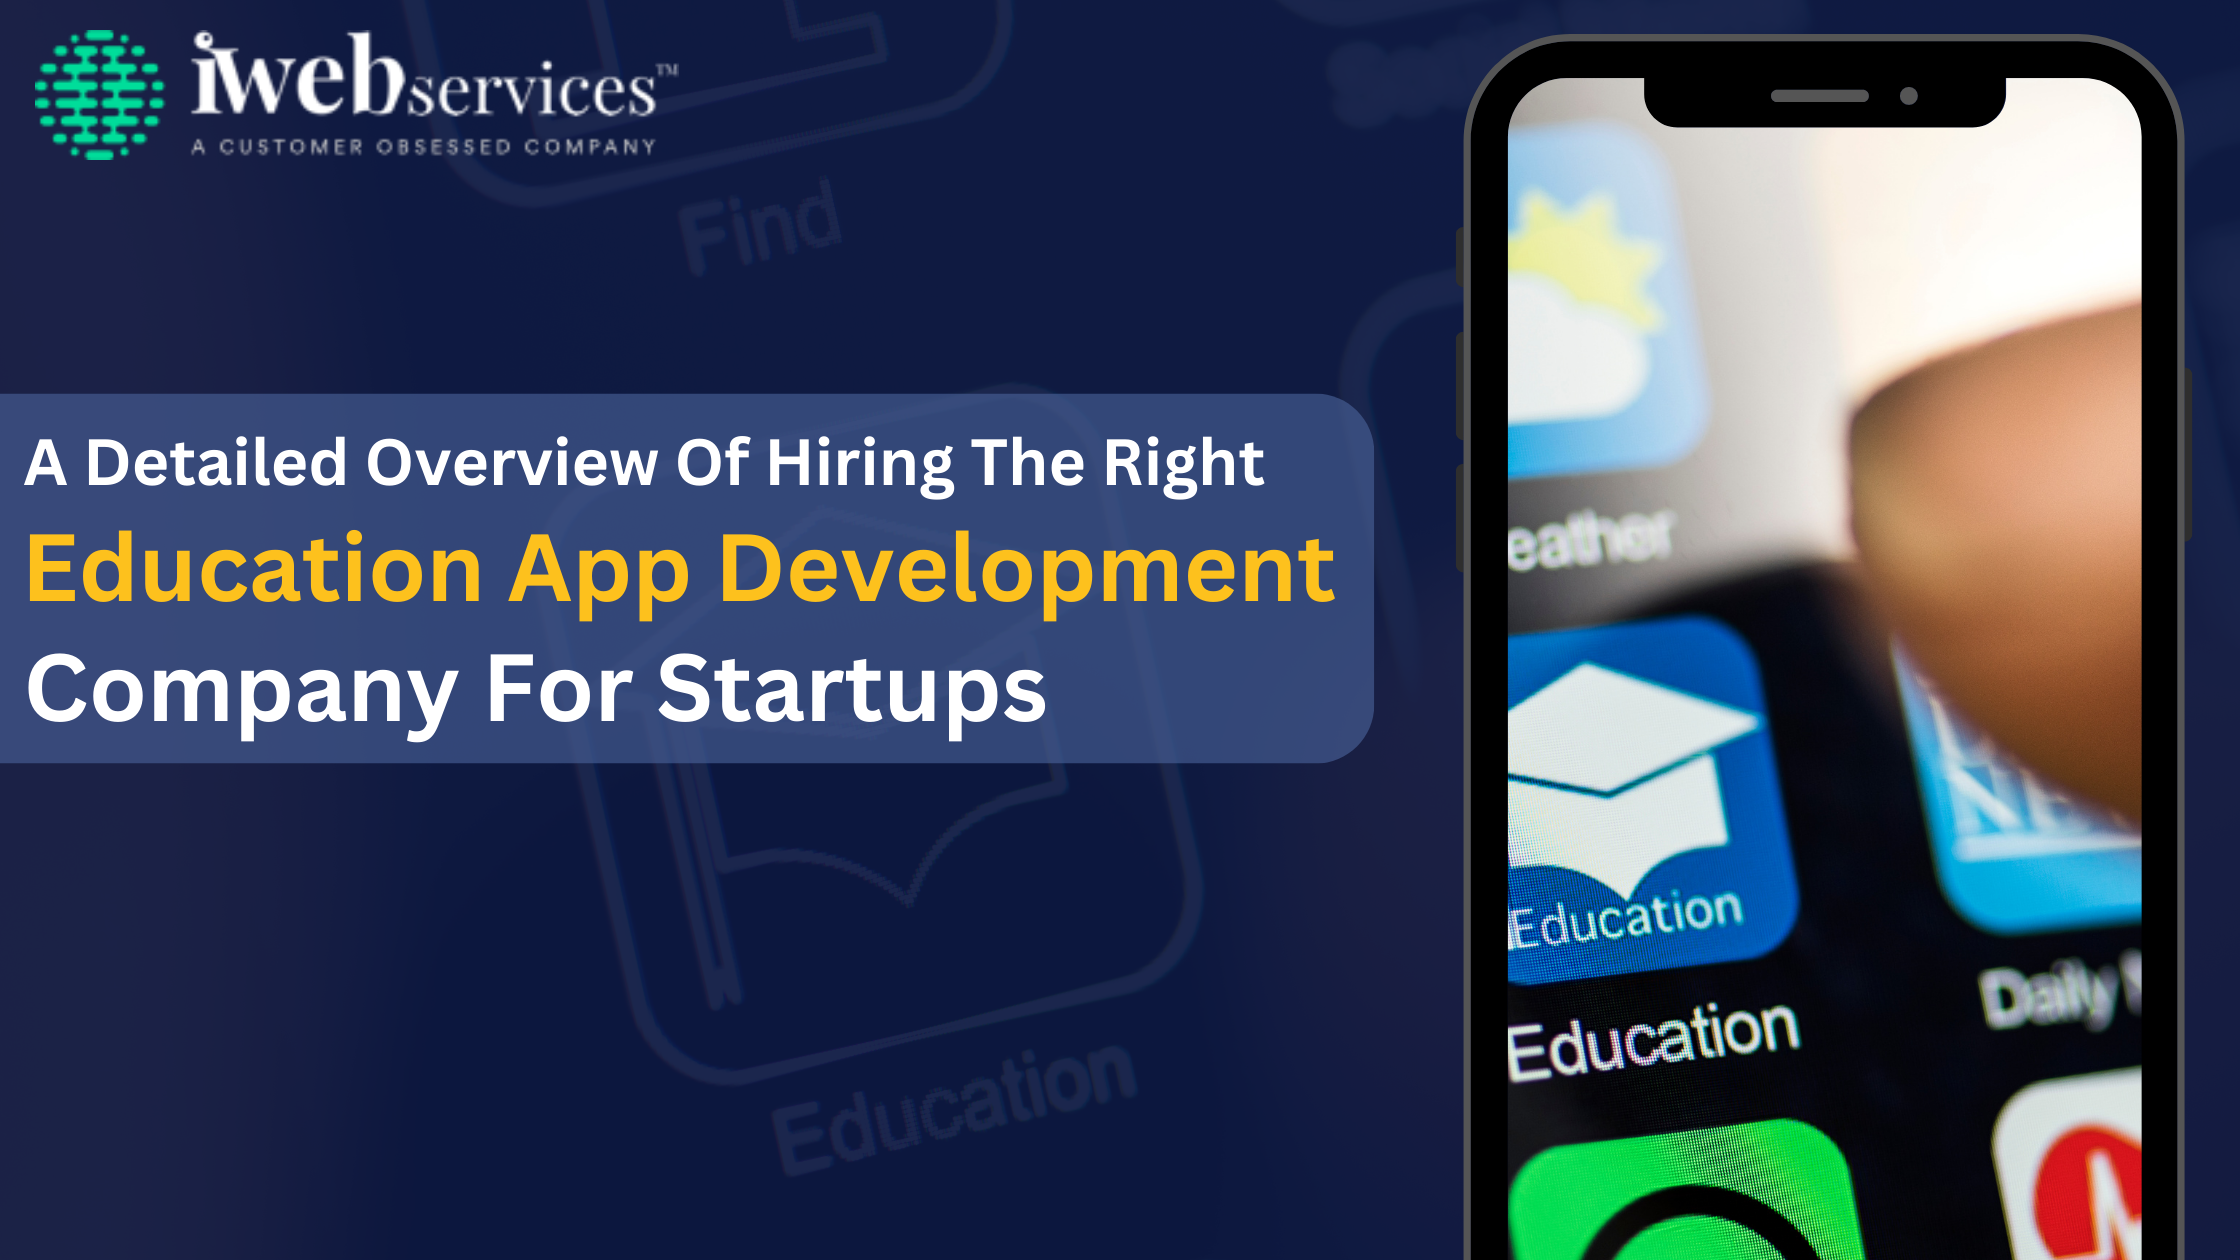 A Detailed Overview of Hiring the Right Education App Development Company for Startups